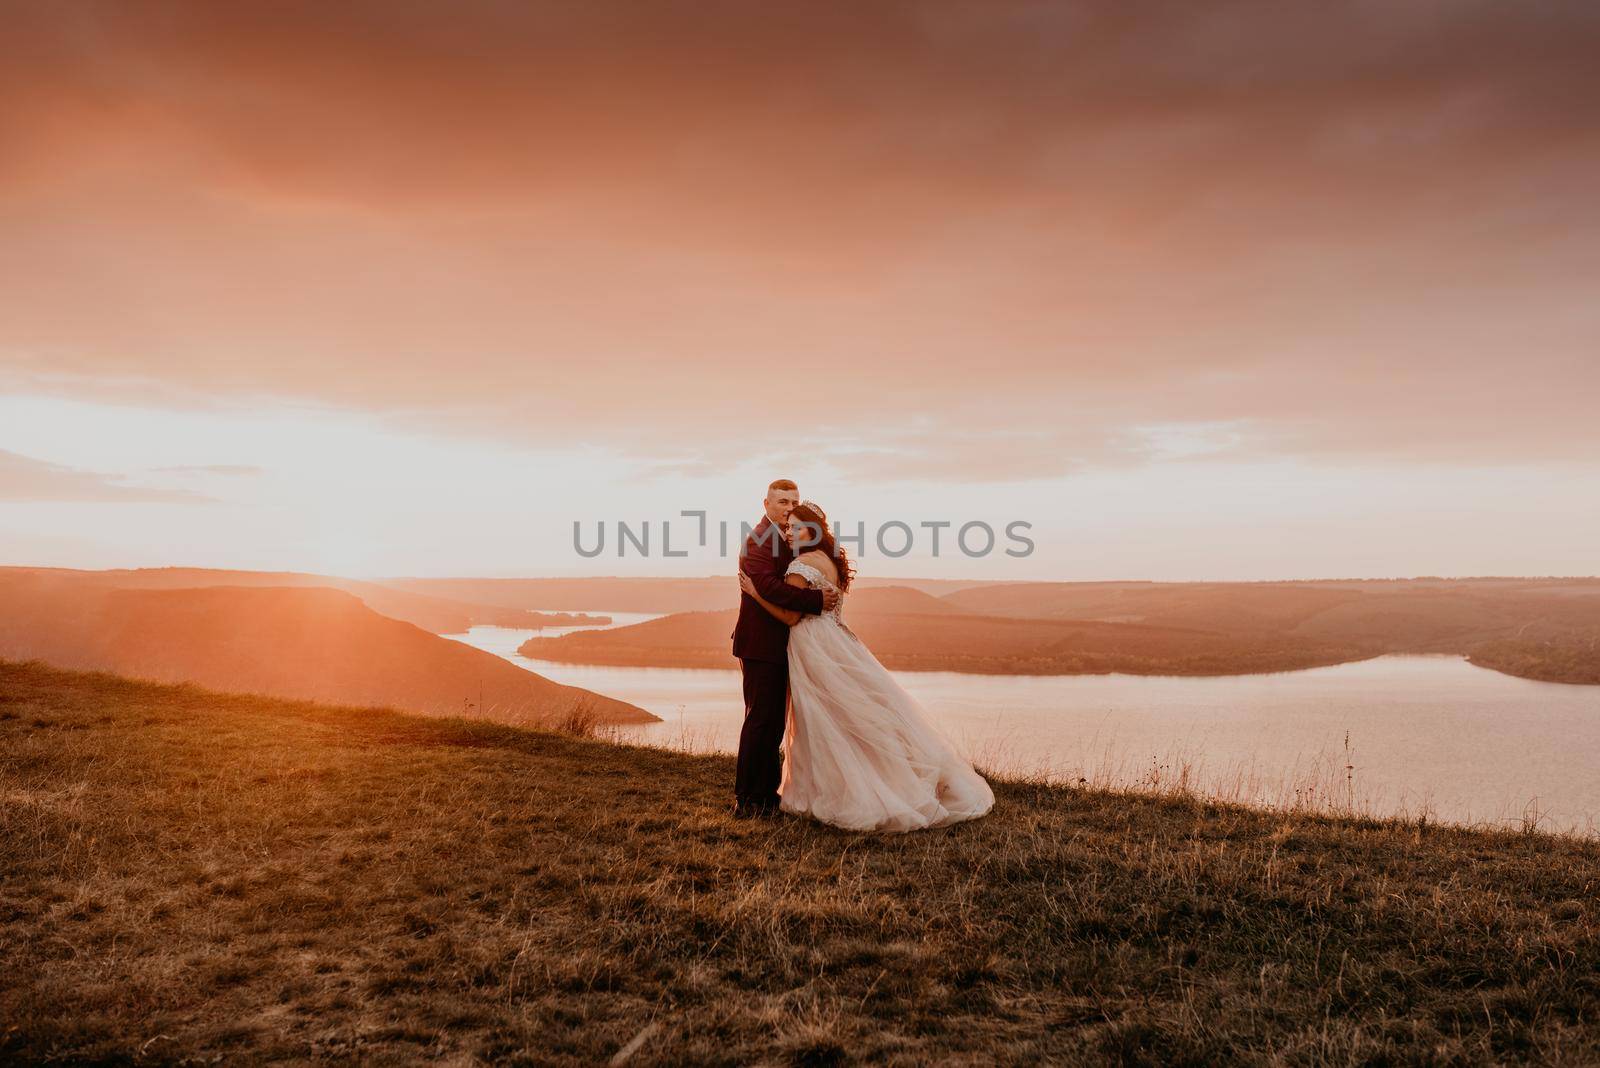 A loving couple wedding newlyweds walk in tsummer in the fall on mountain on cliff above the river. sunset. bride in a white dress with crown on her head. style fashionable women hairstyle makeup